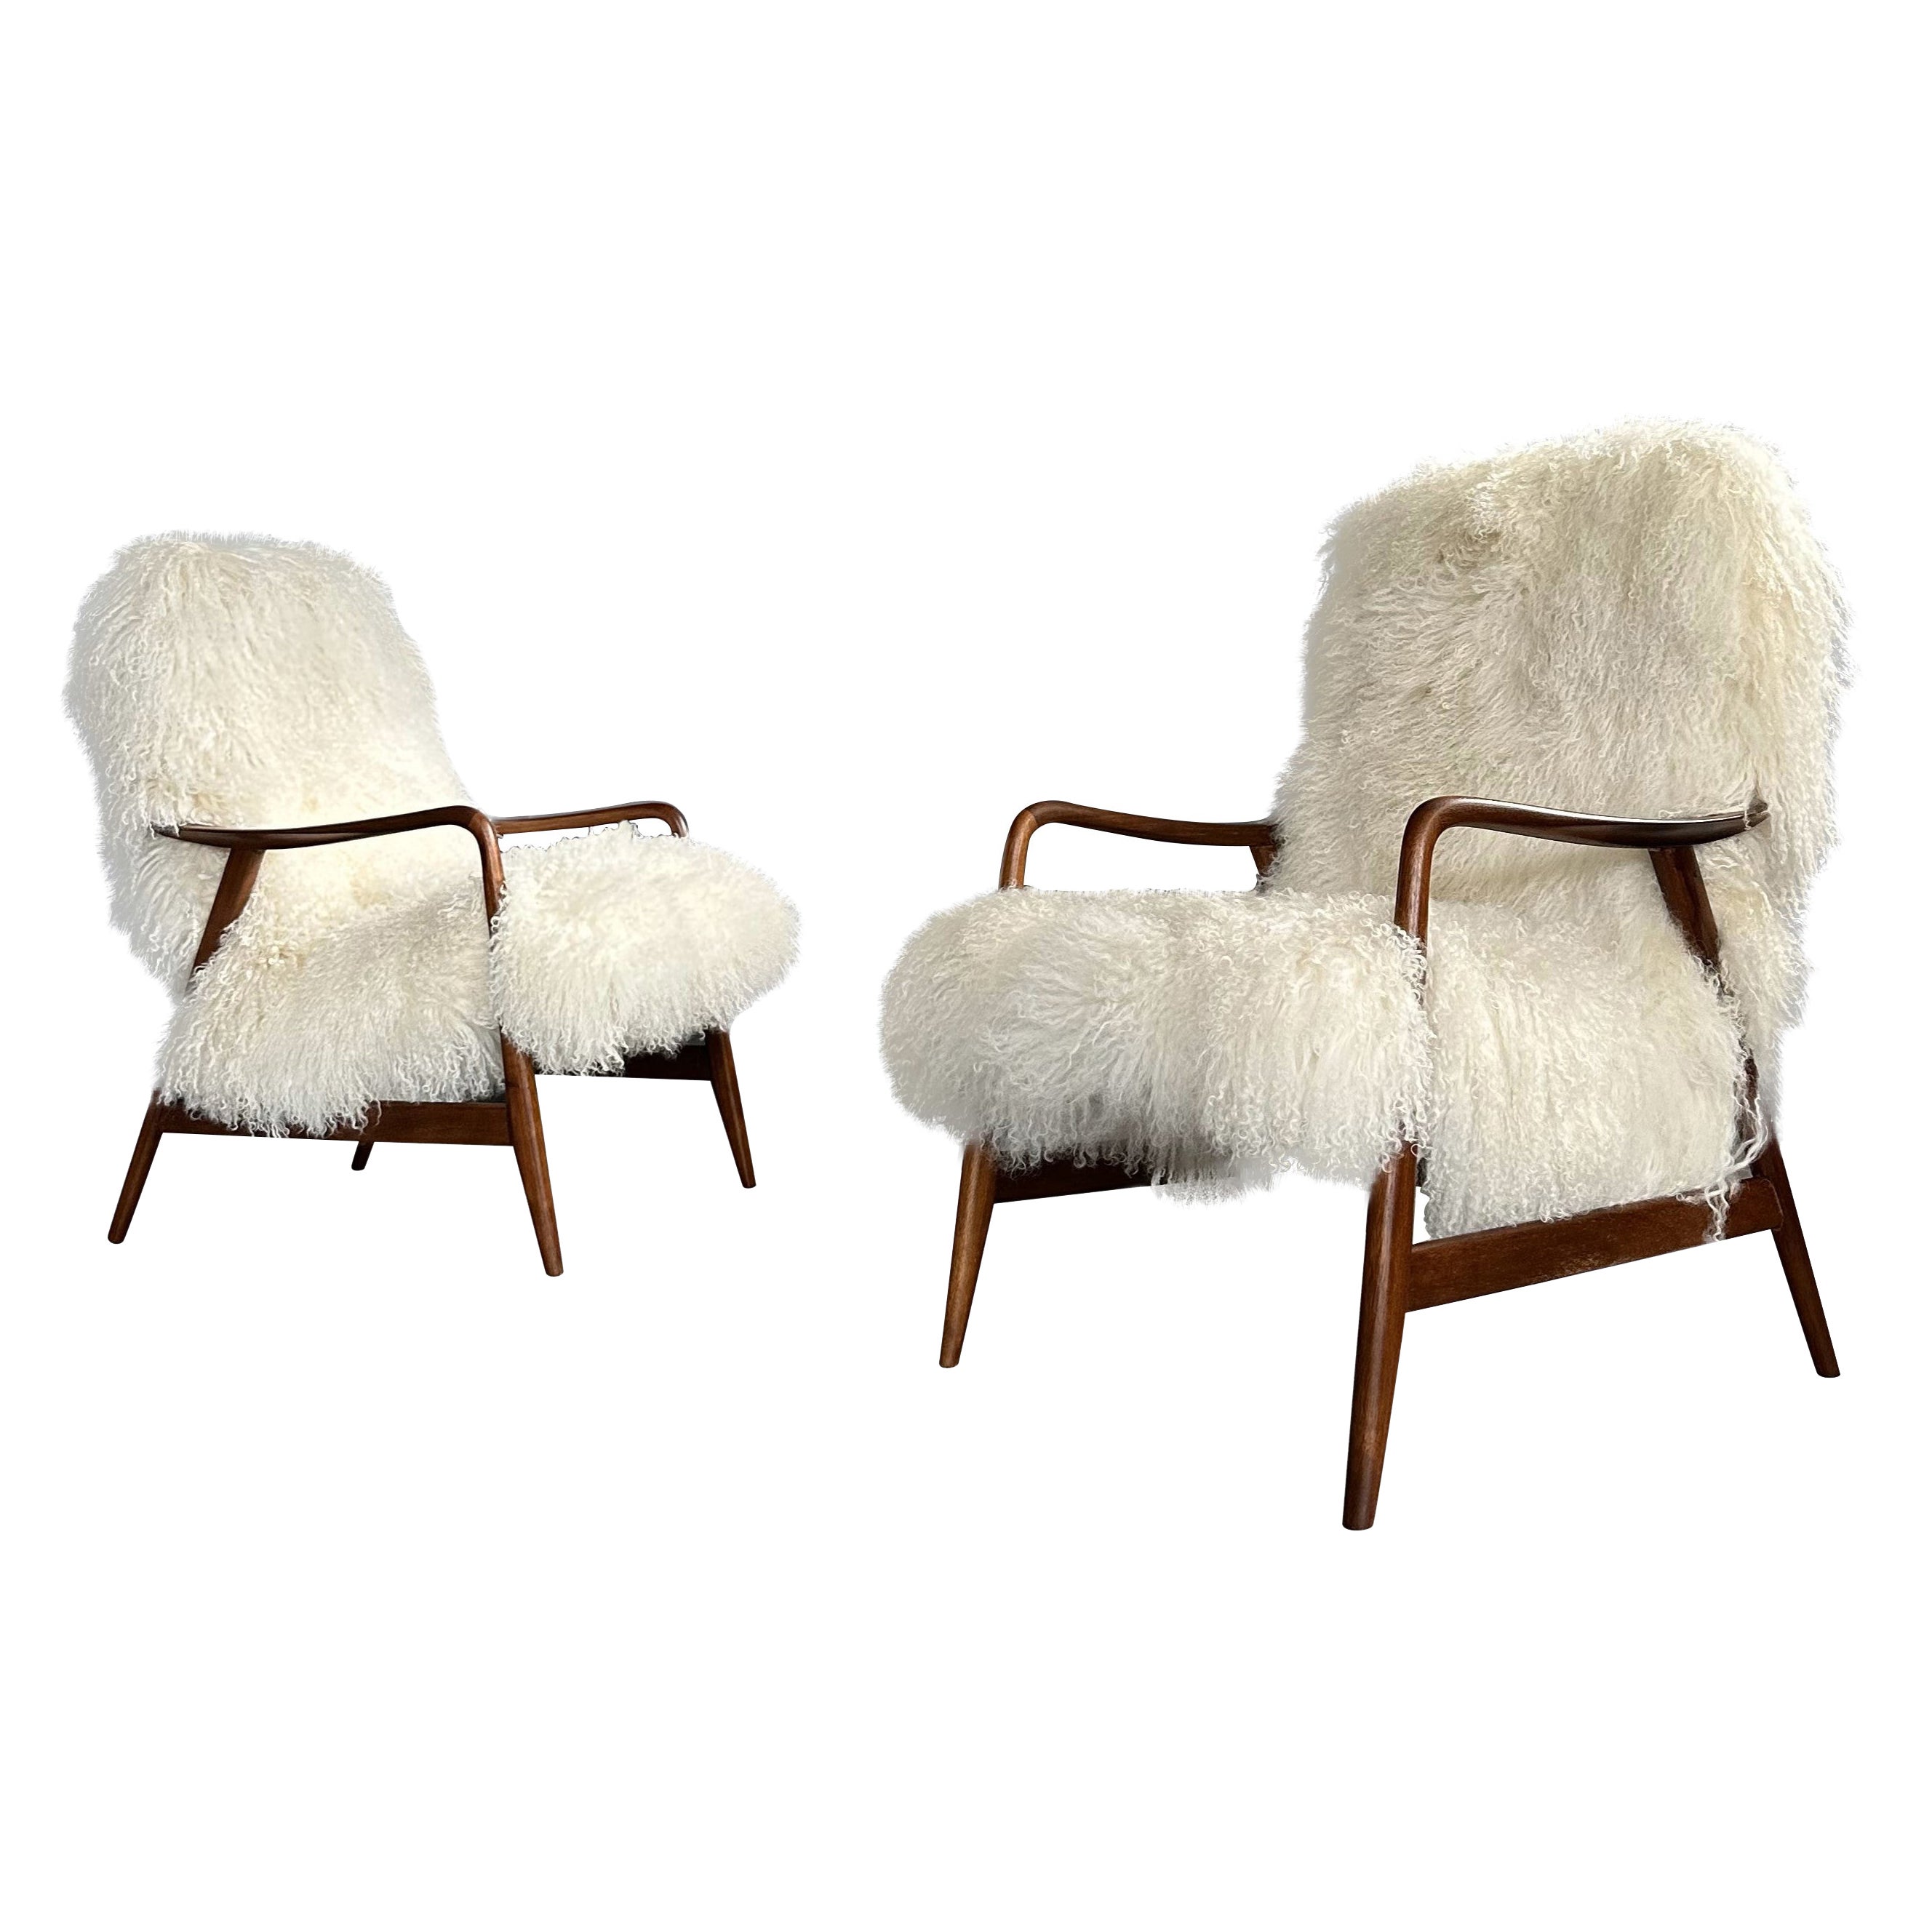 Set of 2 1950s Danish armchairs by Alf Svensson for Dux, teak and goat hair 